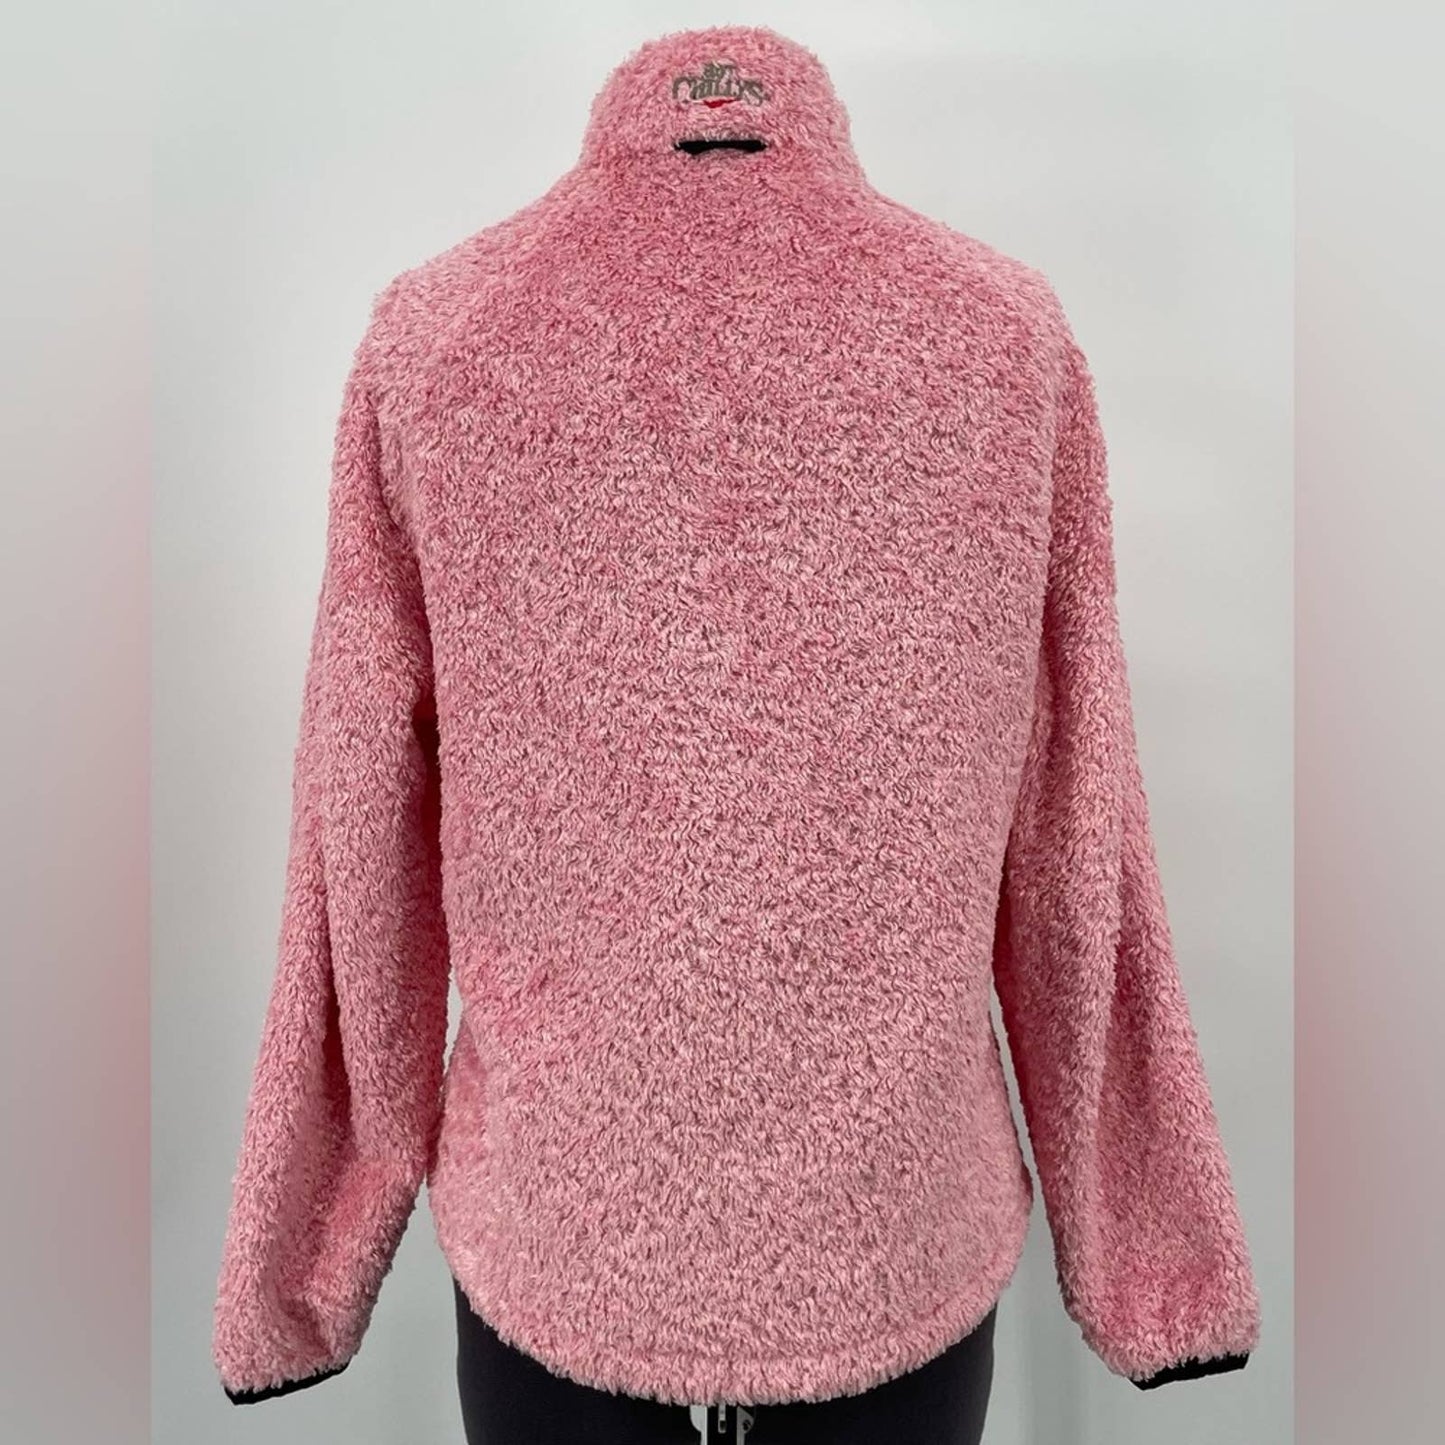 Hot Chillys Pink Shaggy Fuzzy Sherpa Fleece Jacket Shooter Series Zip In Layer Size M